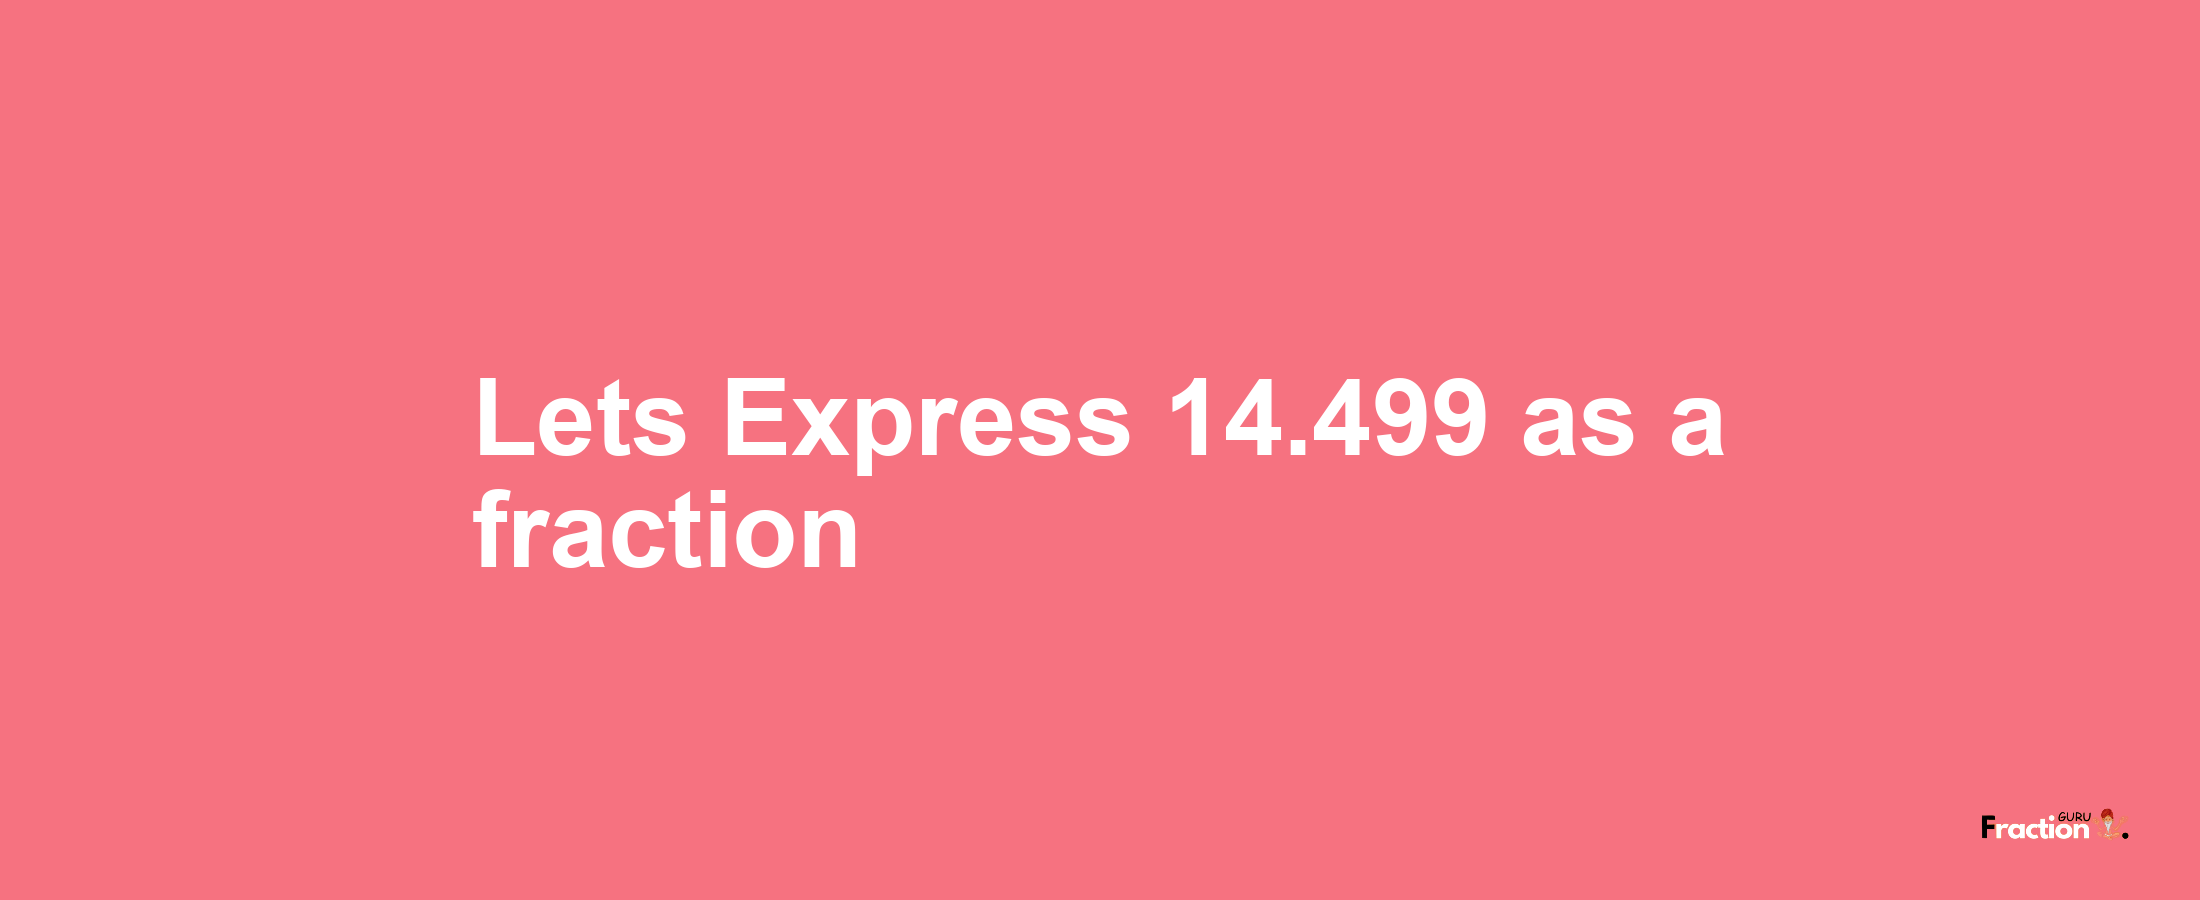 Lets Express 14.499 as afraction